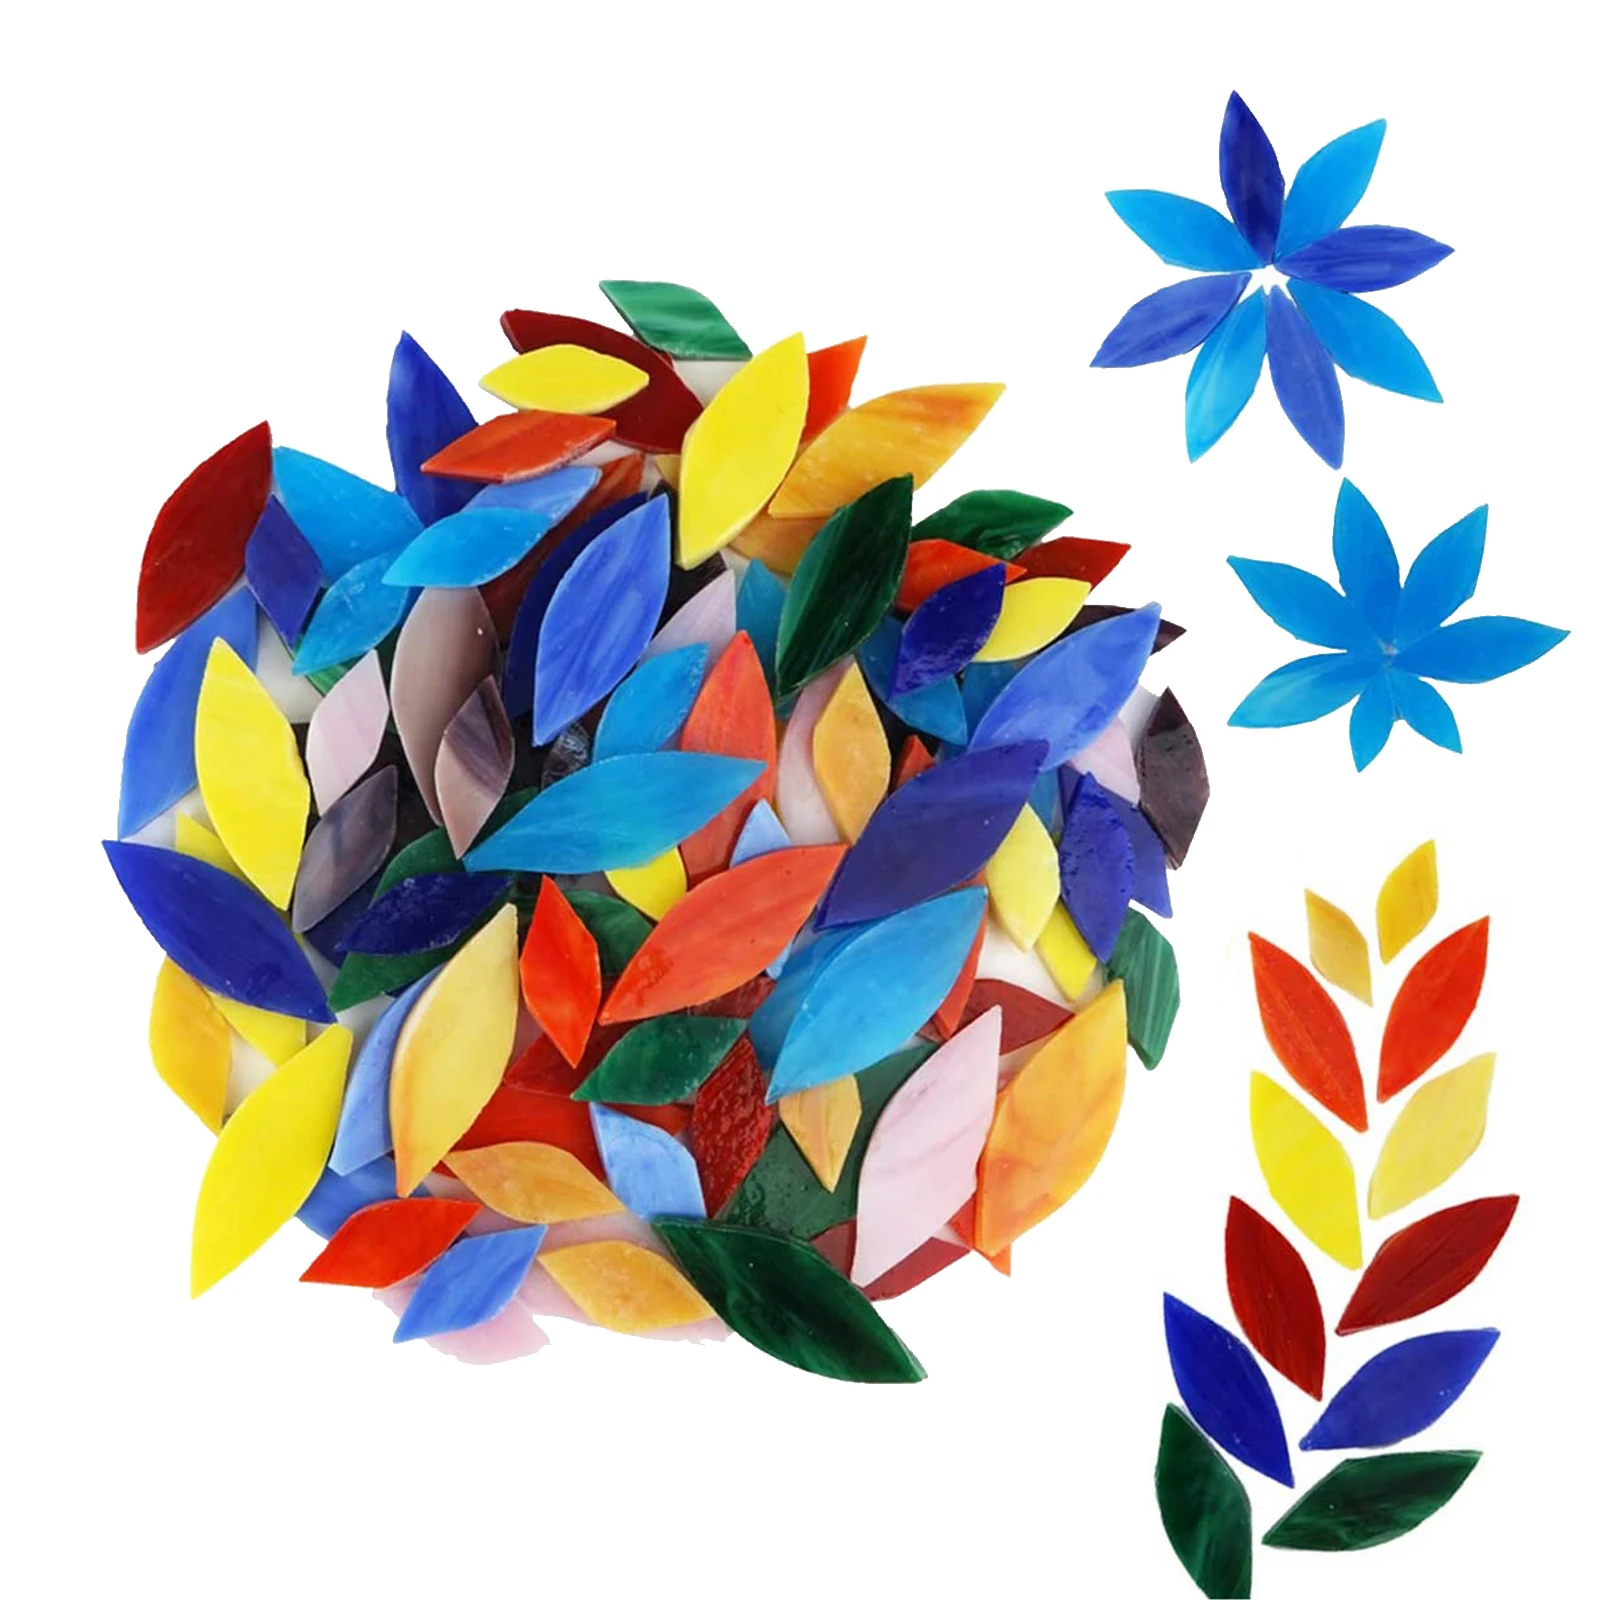 100 Pieces Petal Mosaic Tiles, Hand-Cut Stained Glass Flower Leaves Tiles for Crafts Assorted Size & Colors